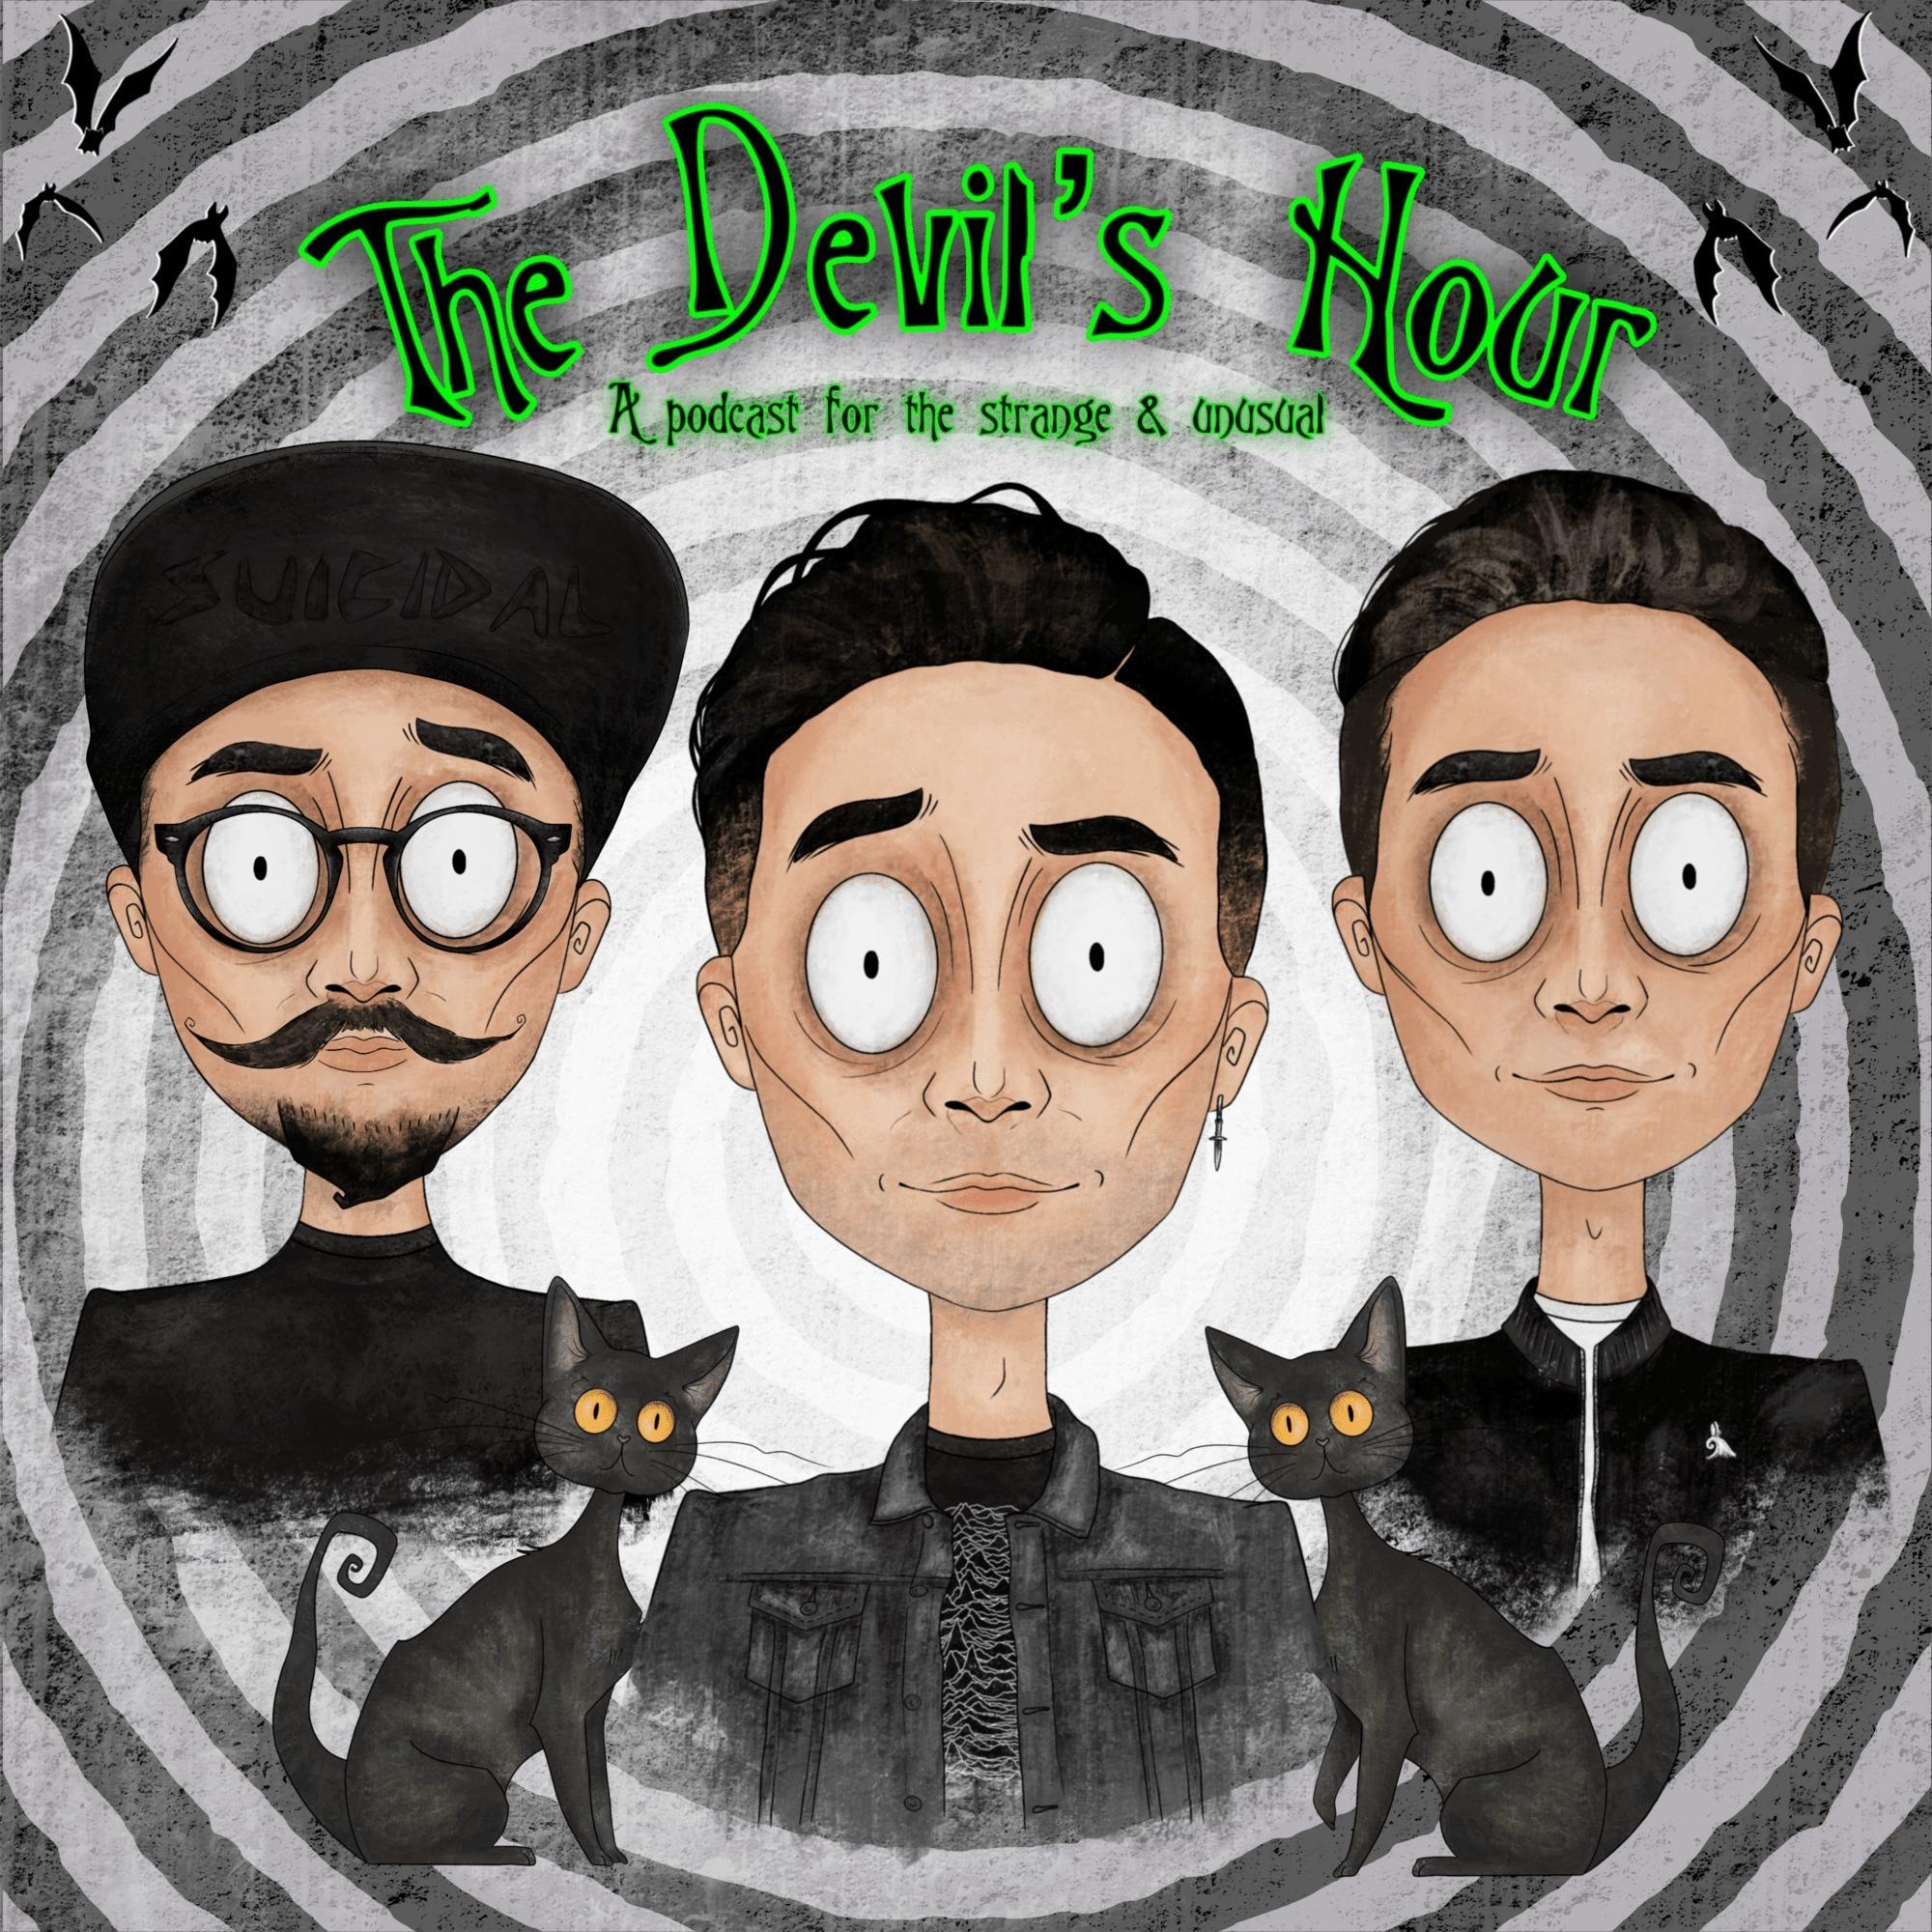 The Devil's Hour: A Podcast For The Strange & Unusual